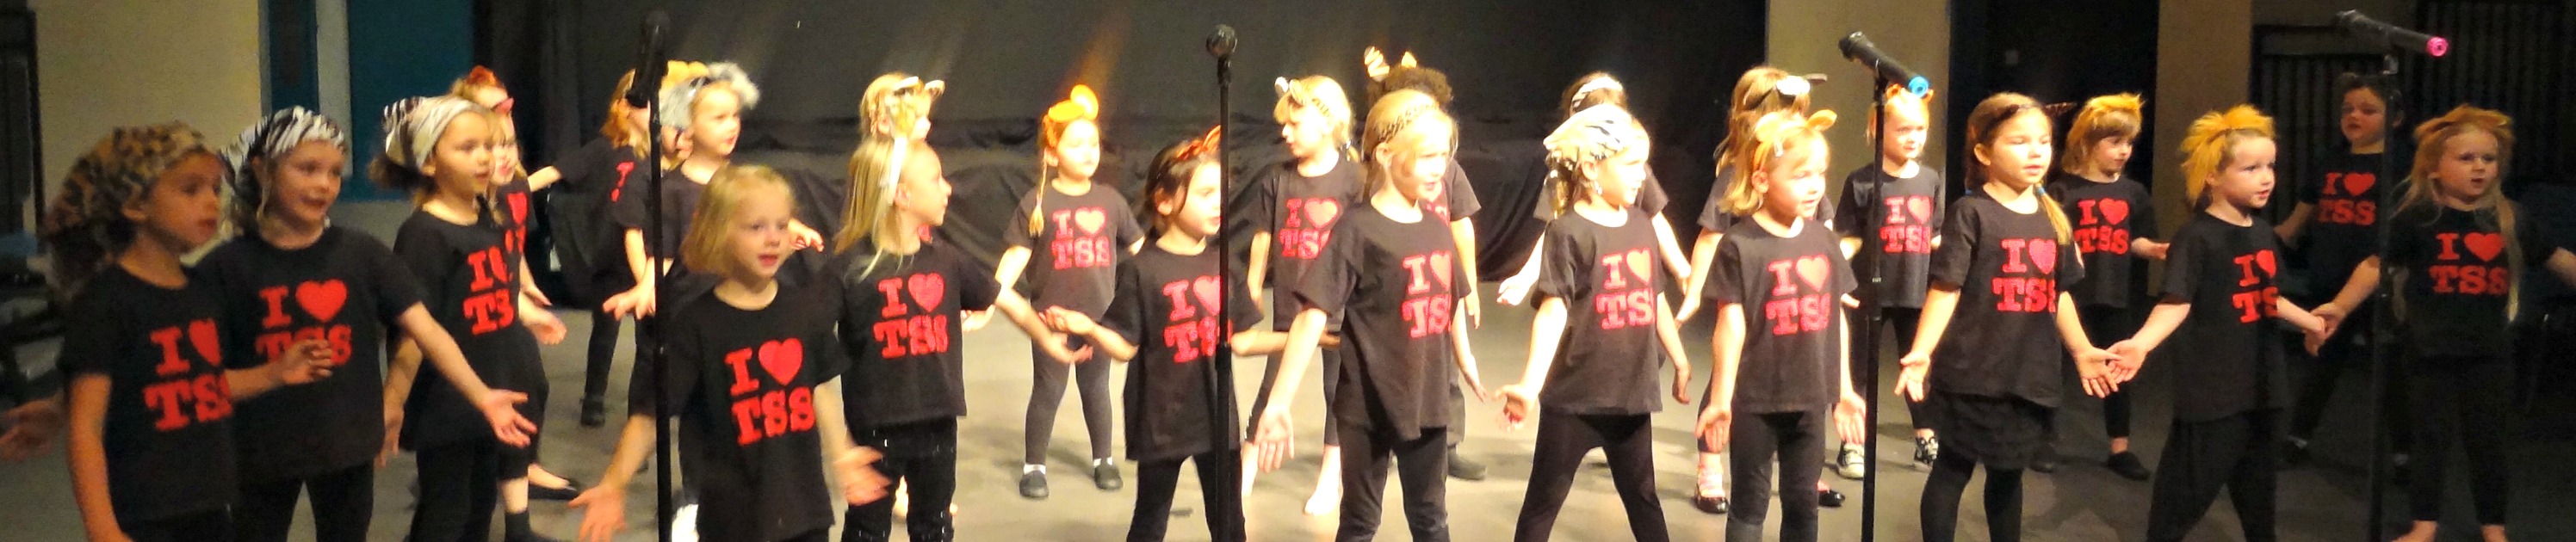 PERFORMING ARTS Telford Boys, Girls lessons in Dance Acting Singing all ages